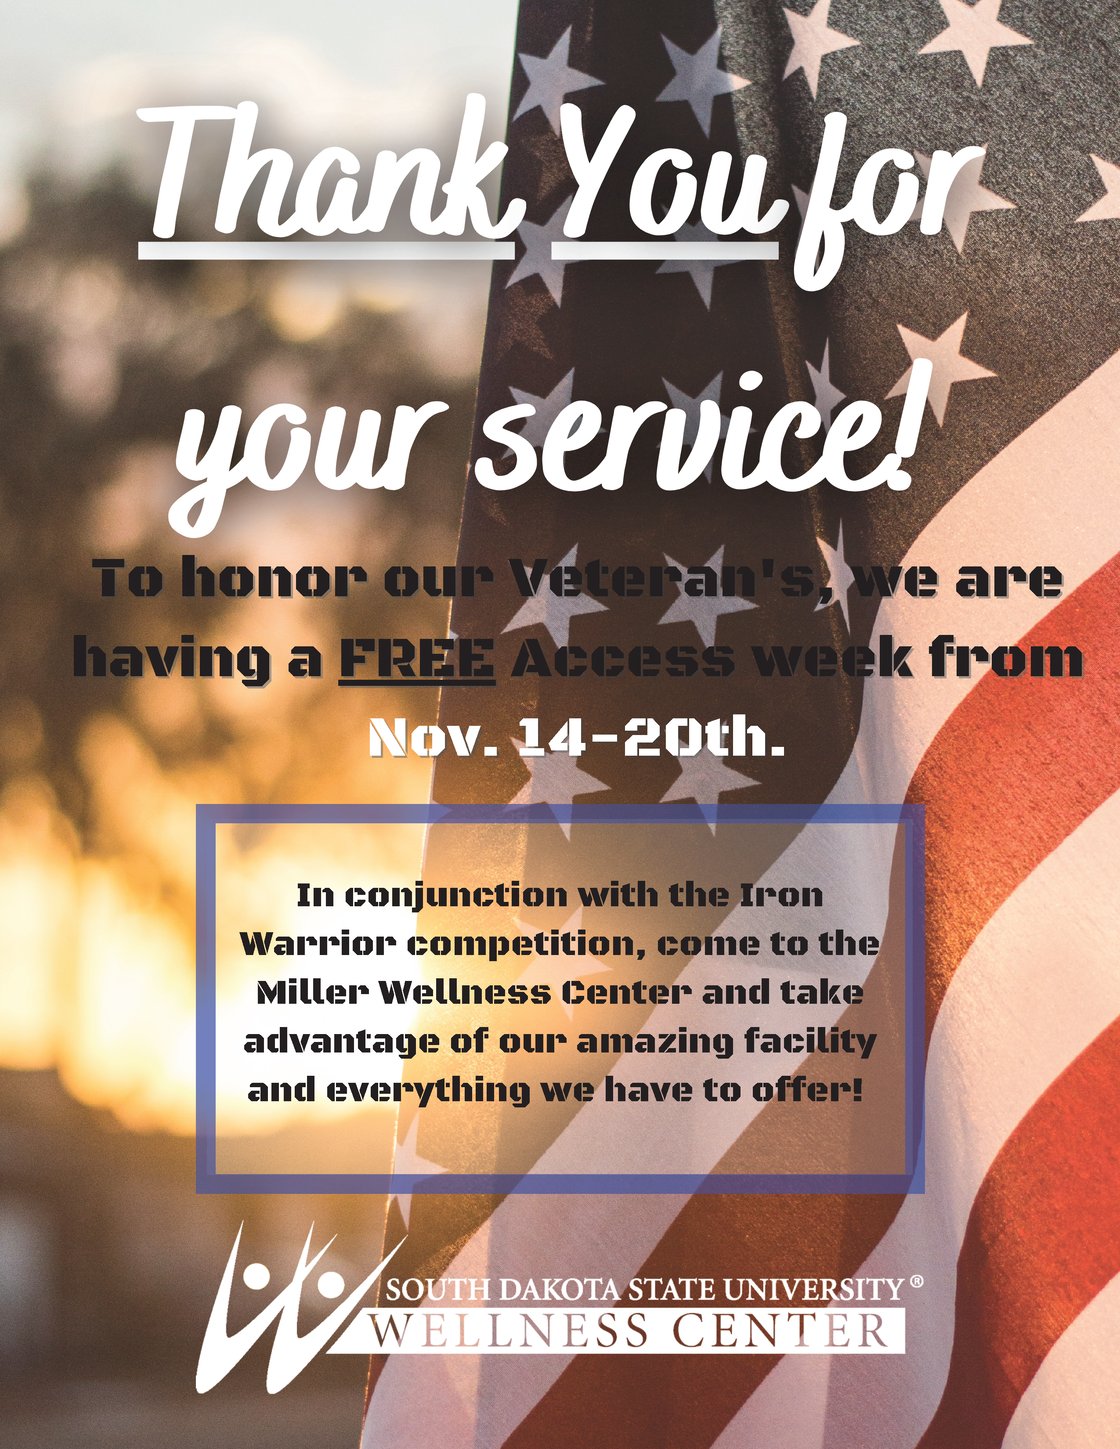 Free Access Day for Vets Week